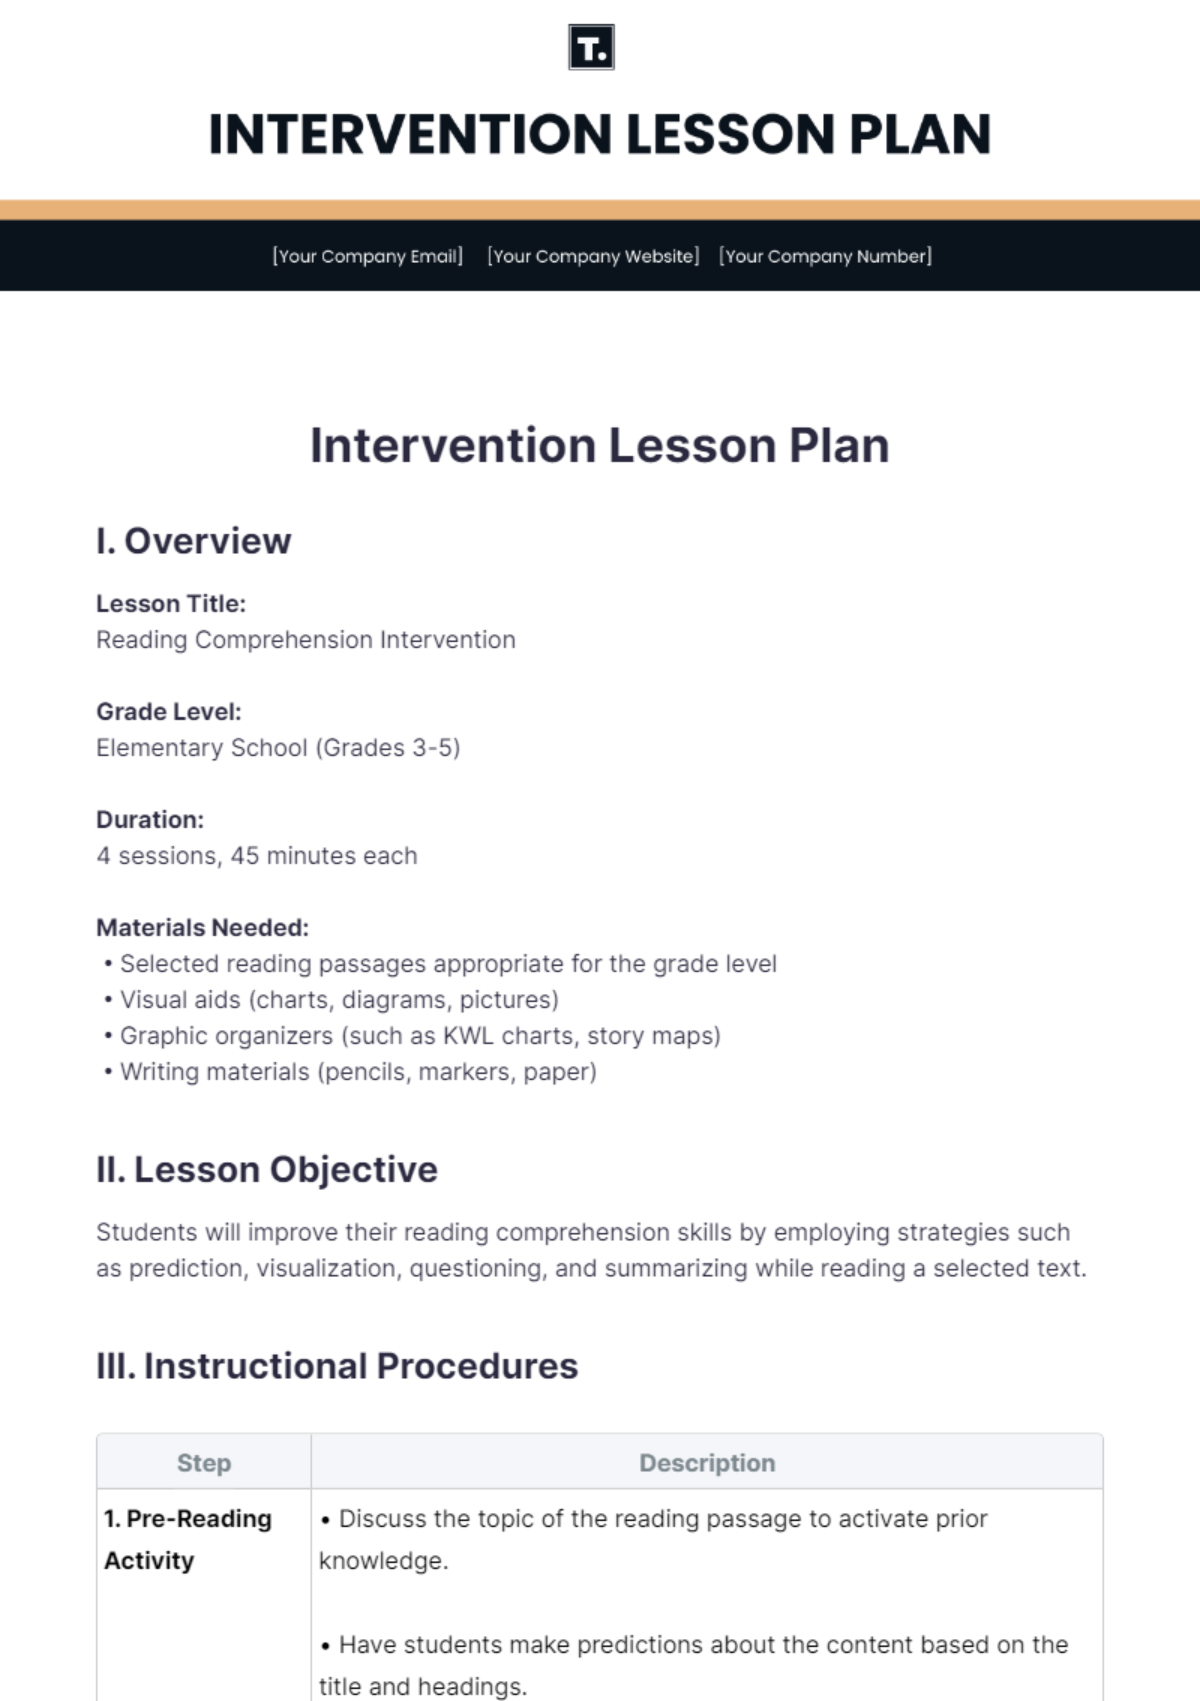 Free Intervention Lesson Plan Template